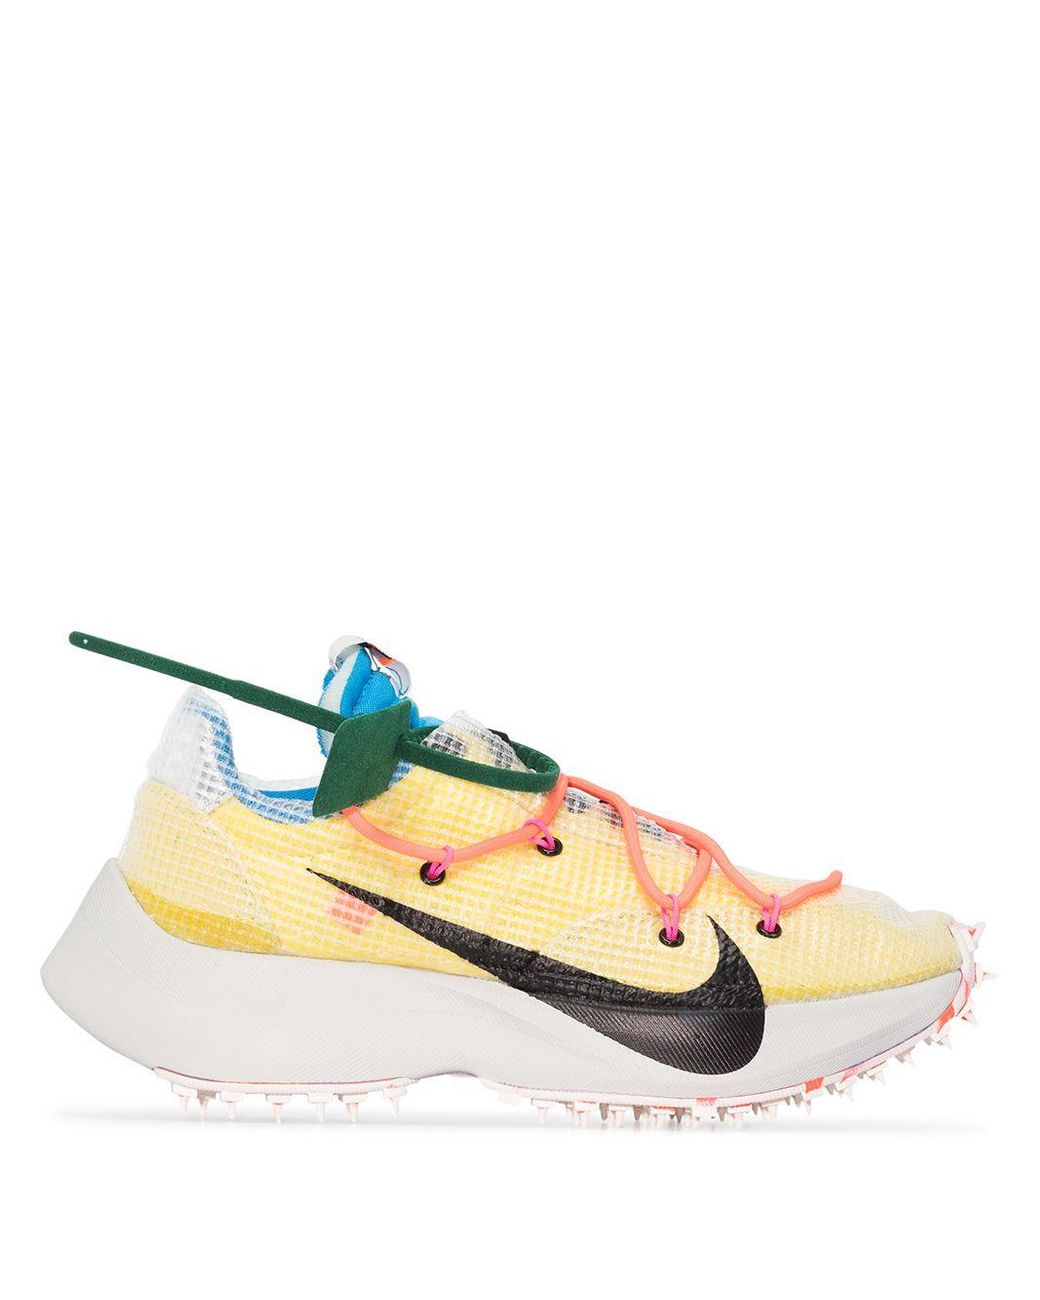 NIKE X OFF-WHITE + Off-white Vapor Street Ripstop, Suede, Mesh And 